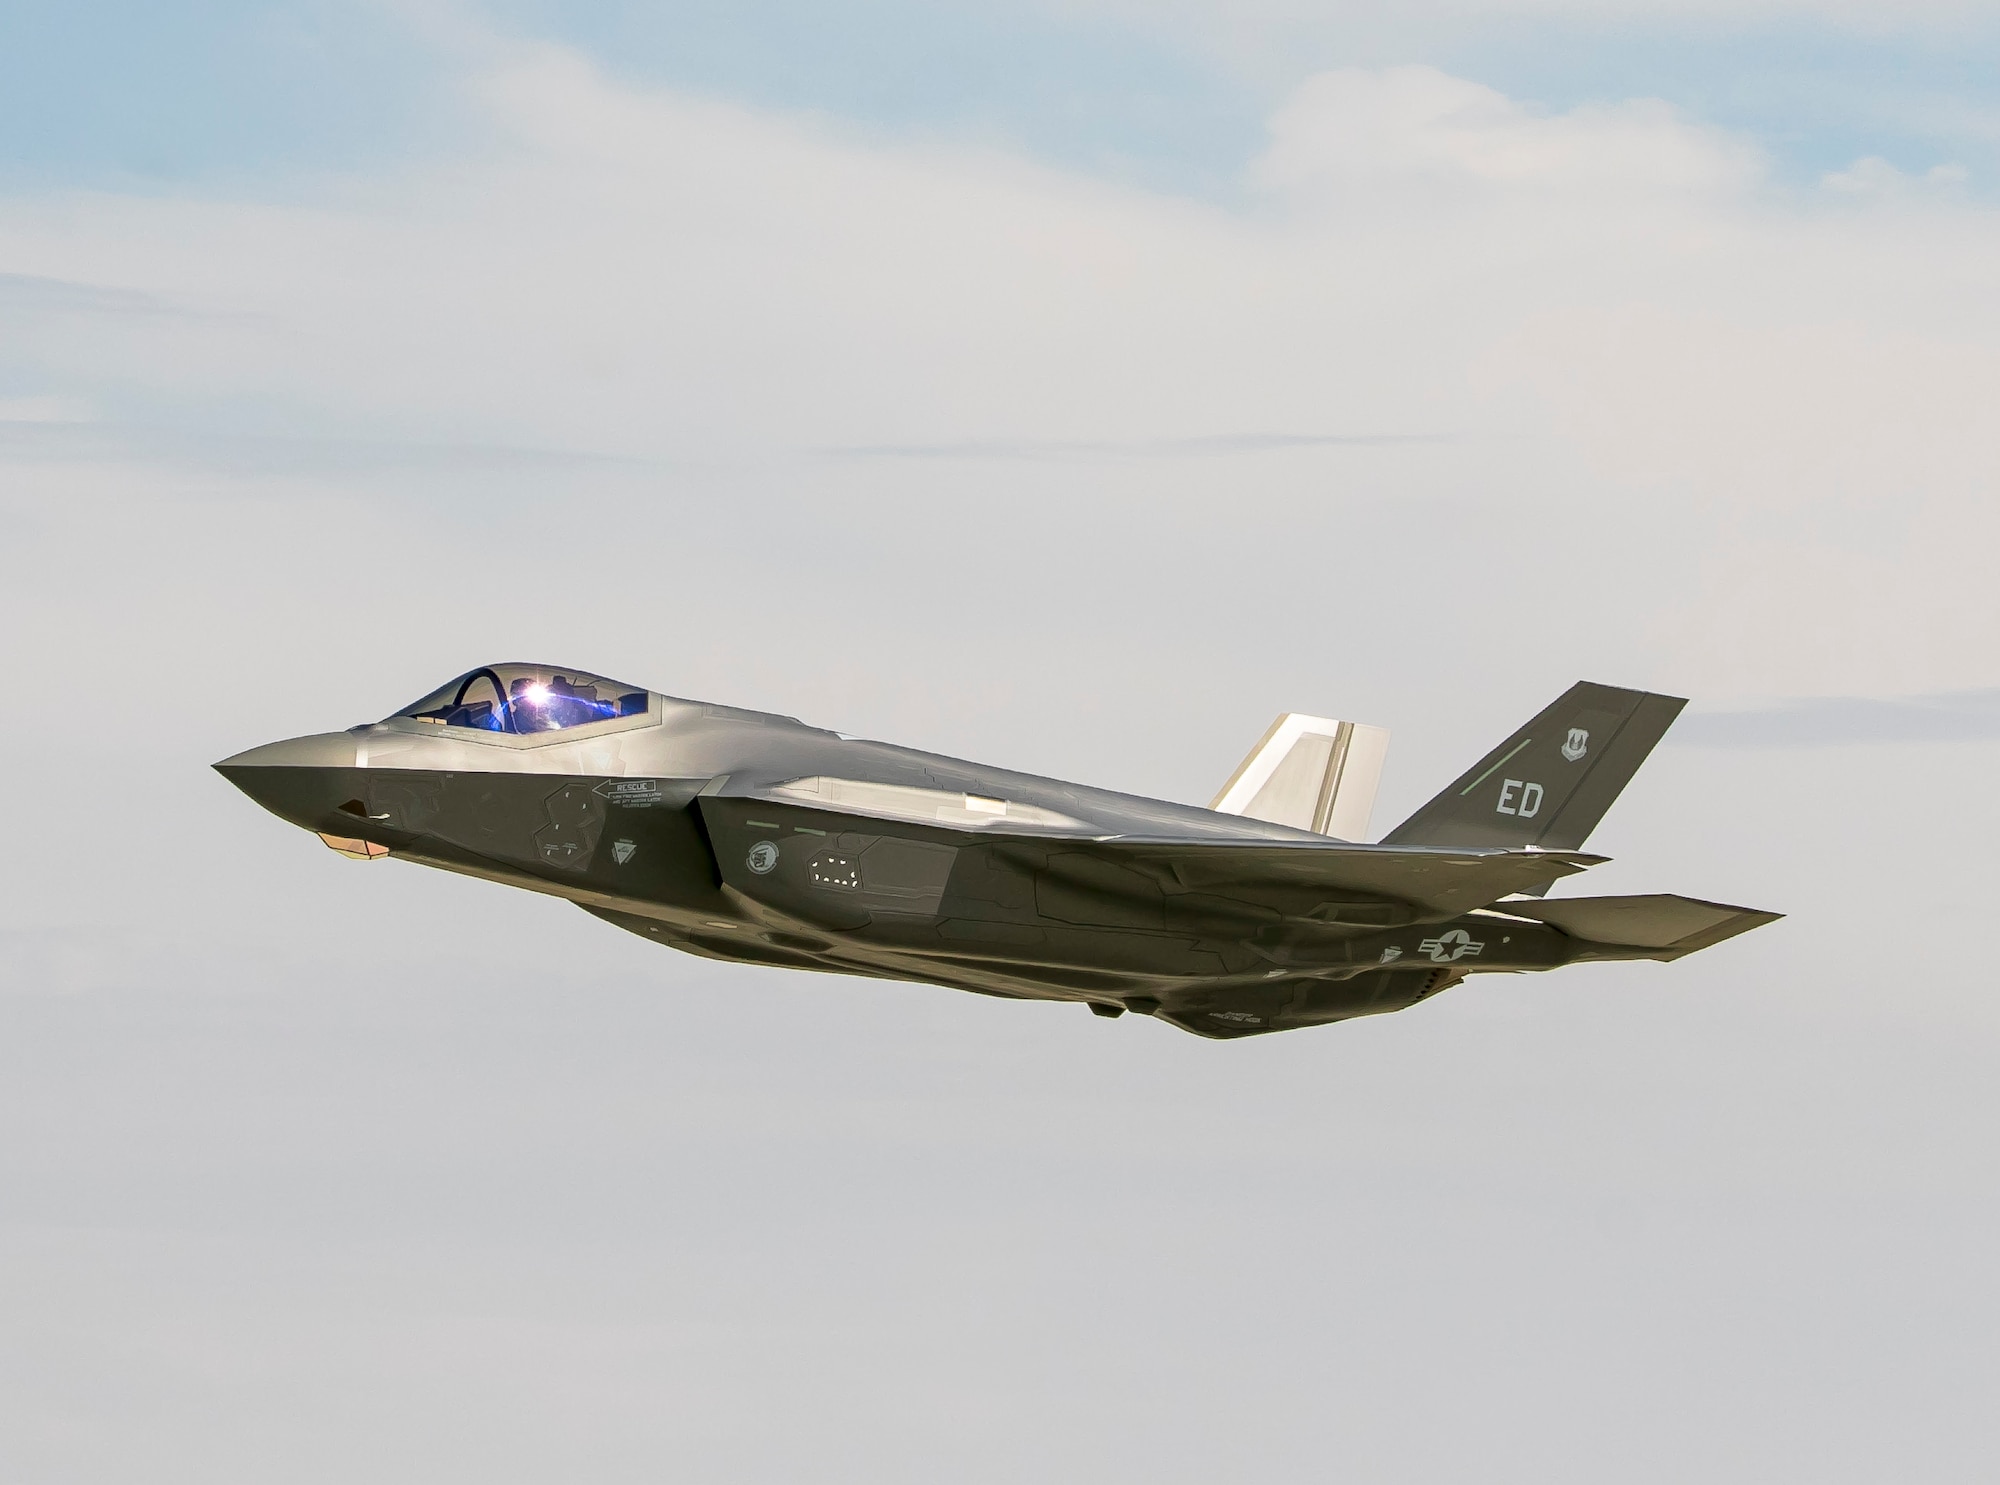 An F-35A Lightning II arrives at Edwards Air Force Base, California, Aug. 1. The aircraft, Air Force serial number 338, is the first of six F-35s the 461st Flight Test Squadron and F-35 Lightning II Integrated Test Force will receive in the next few years. The upgraded fleet will be used to test the Technical Refresh 3 and Block 4 configurations of the Air Force’s newest fighter that will create tactical and operational advantages over peer competitors. (Air Force photo by Chase Kohler)